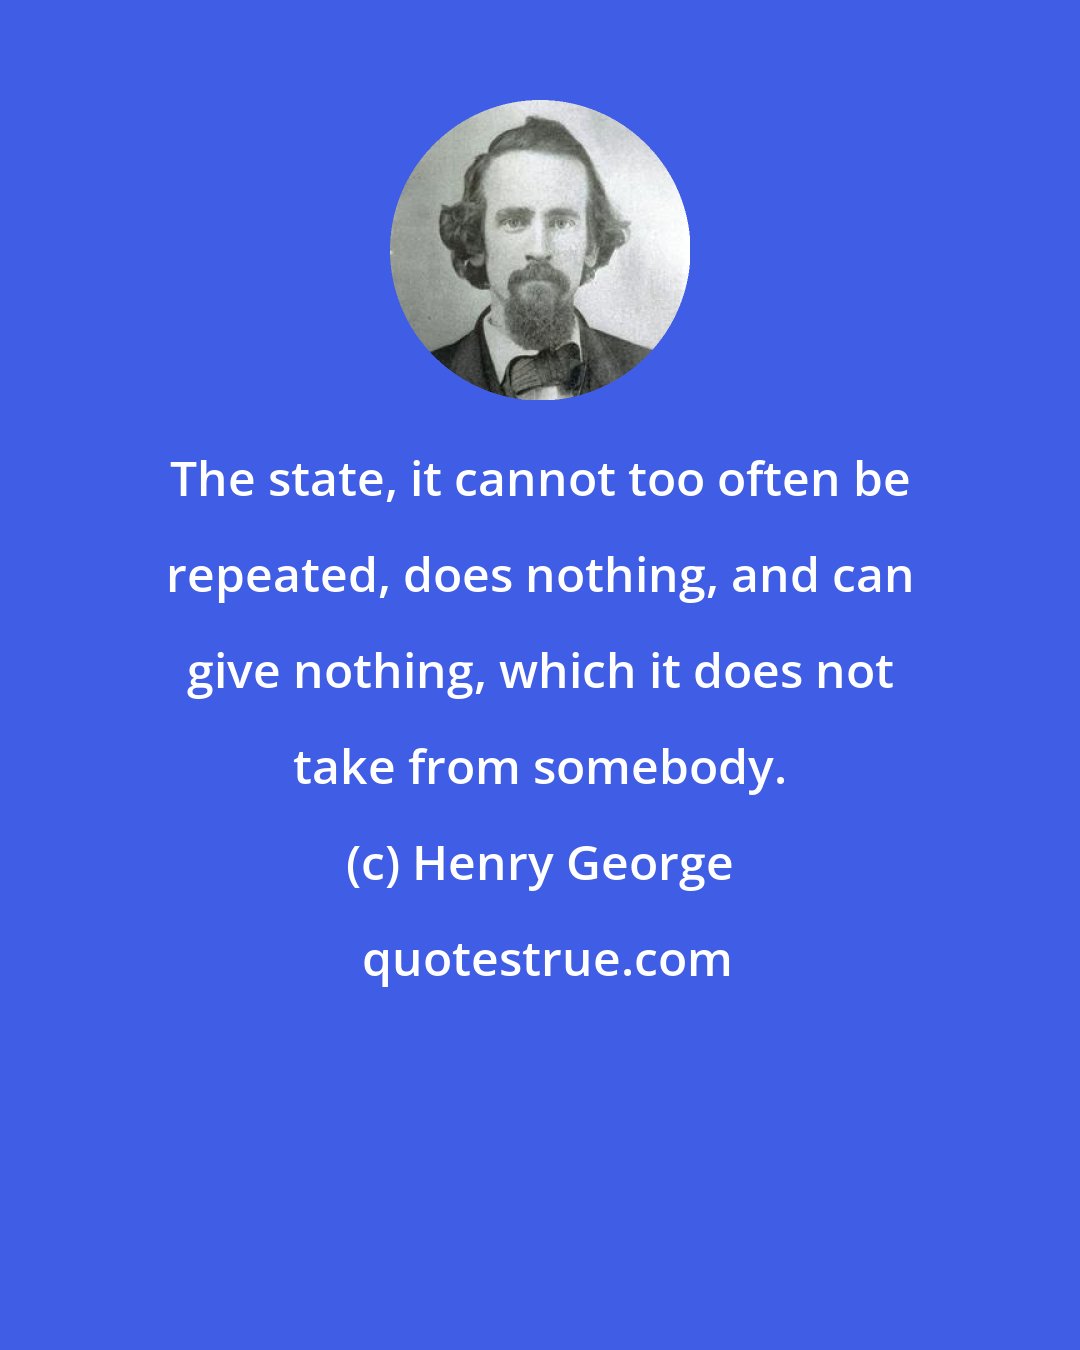 Henry George: The state, it cannot too often be repeated, does nothing, and can give nothing, which it does not take from somebody.